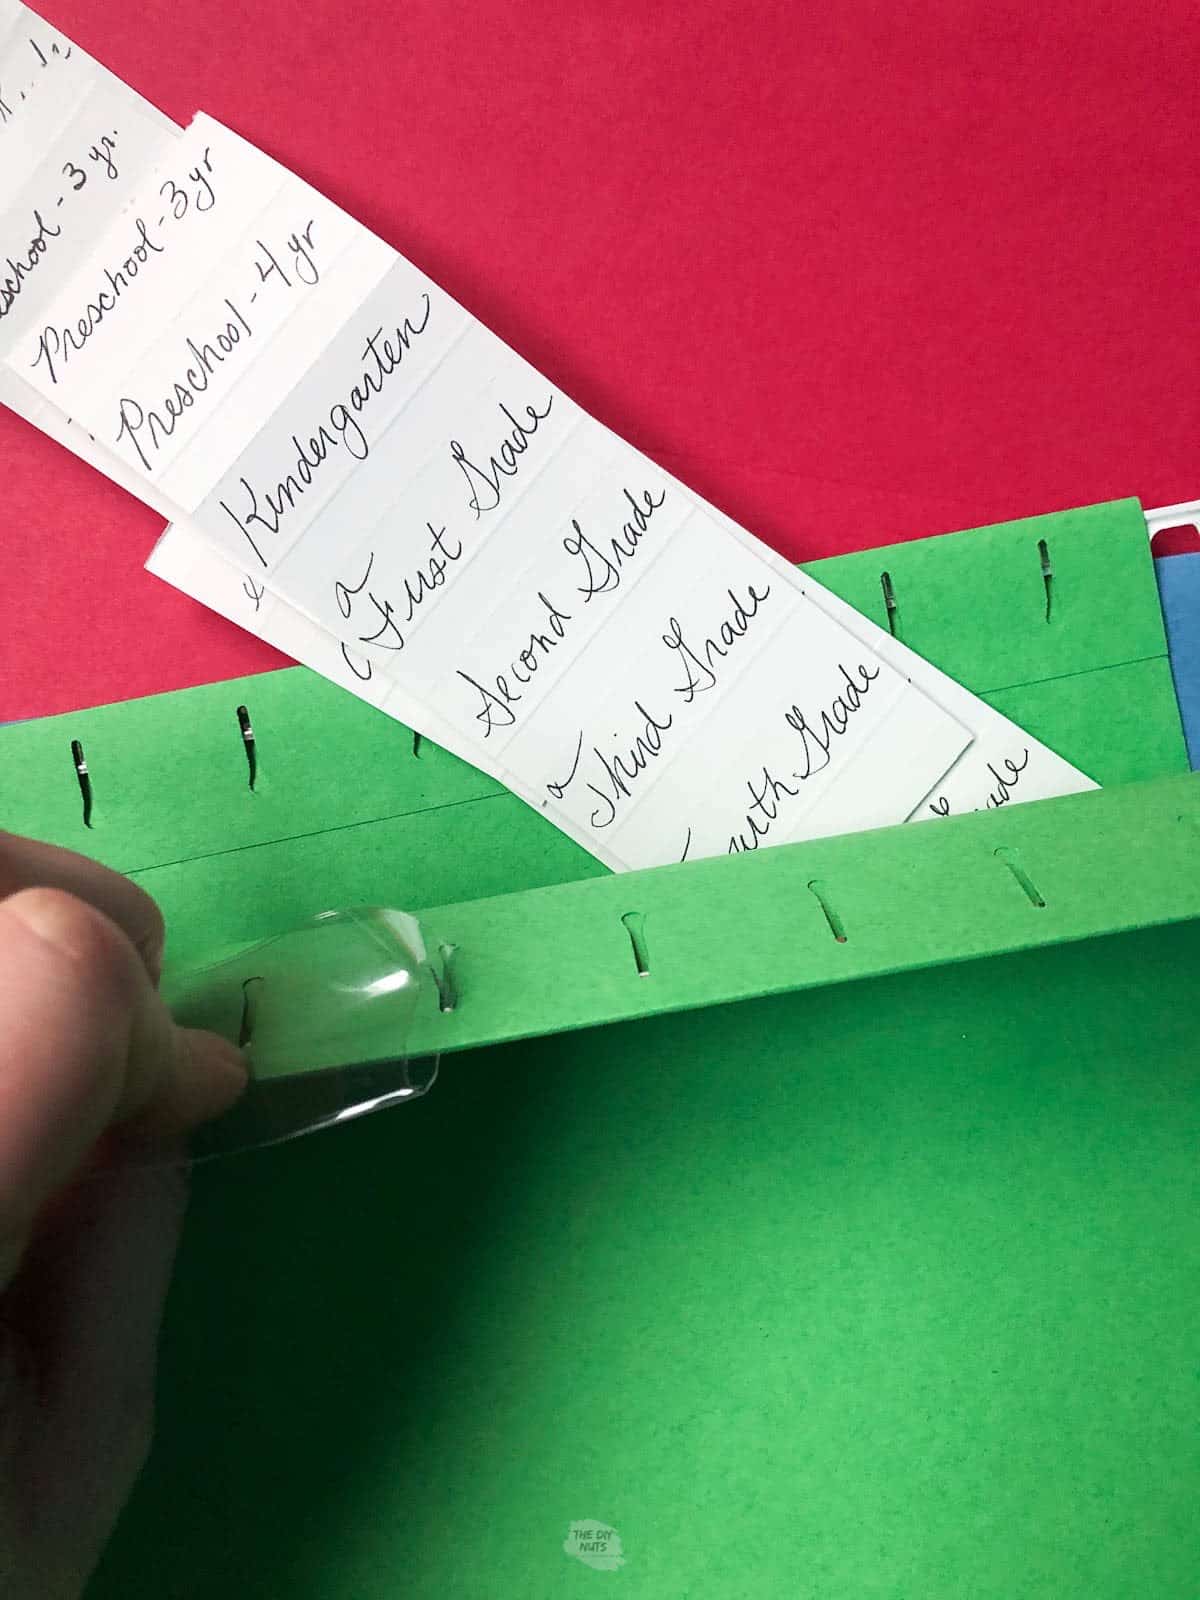 labels with grades written on in green file folder.